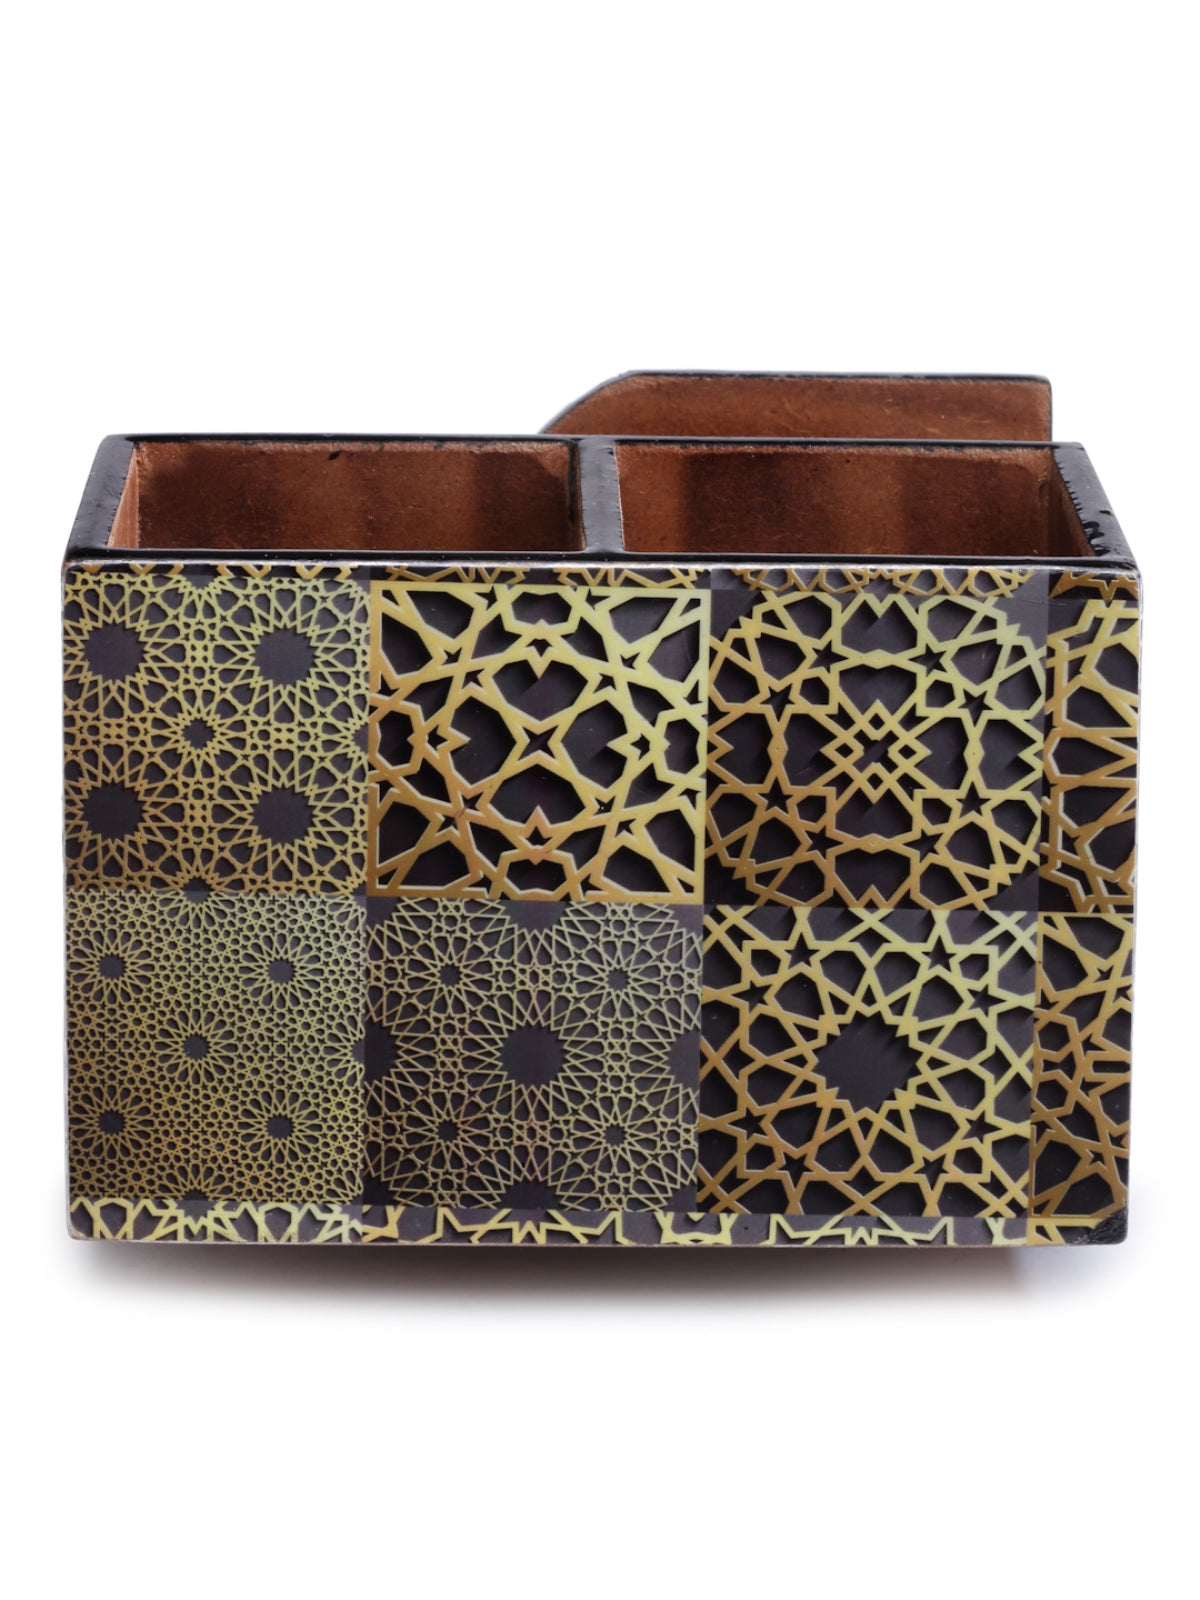 Black & Yellow Geometric Patterned Tissue & Cutlery Holder